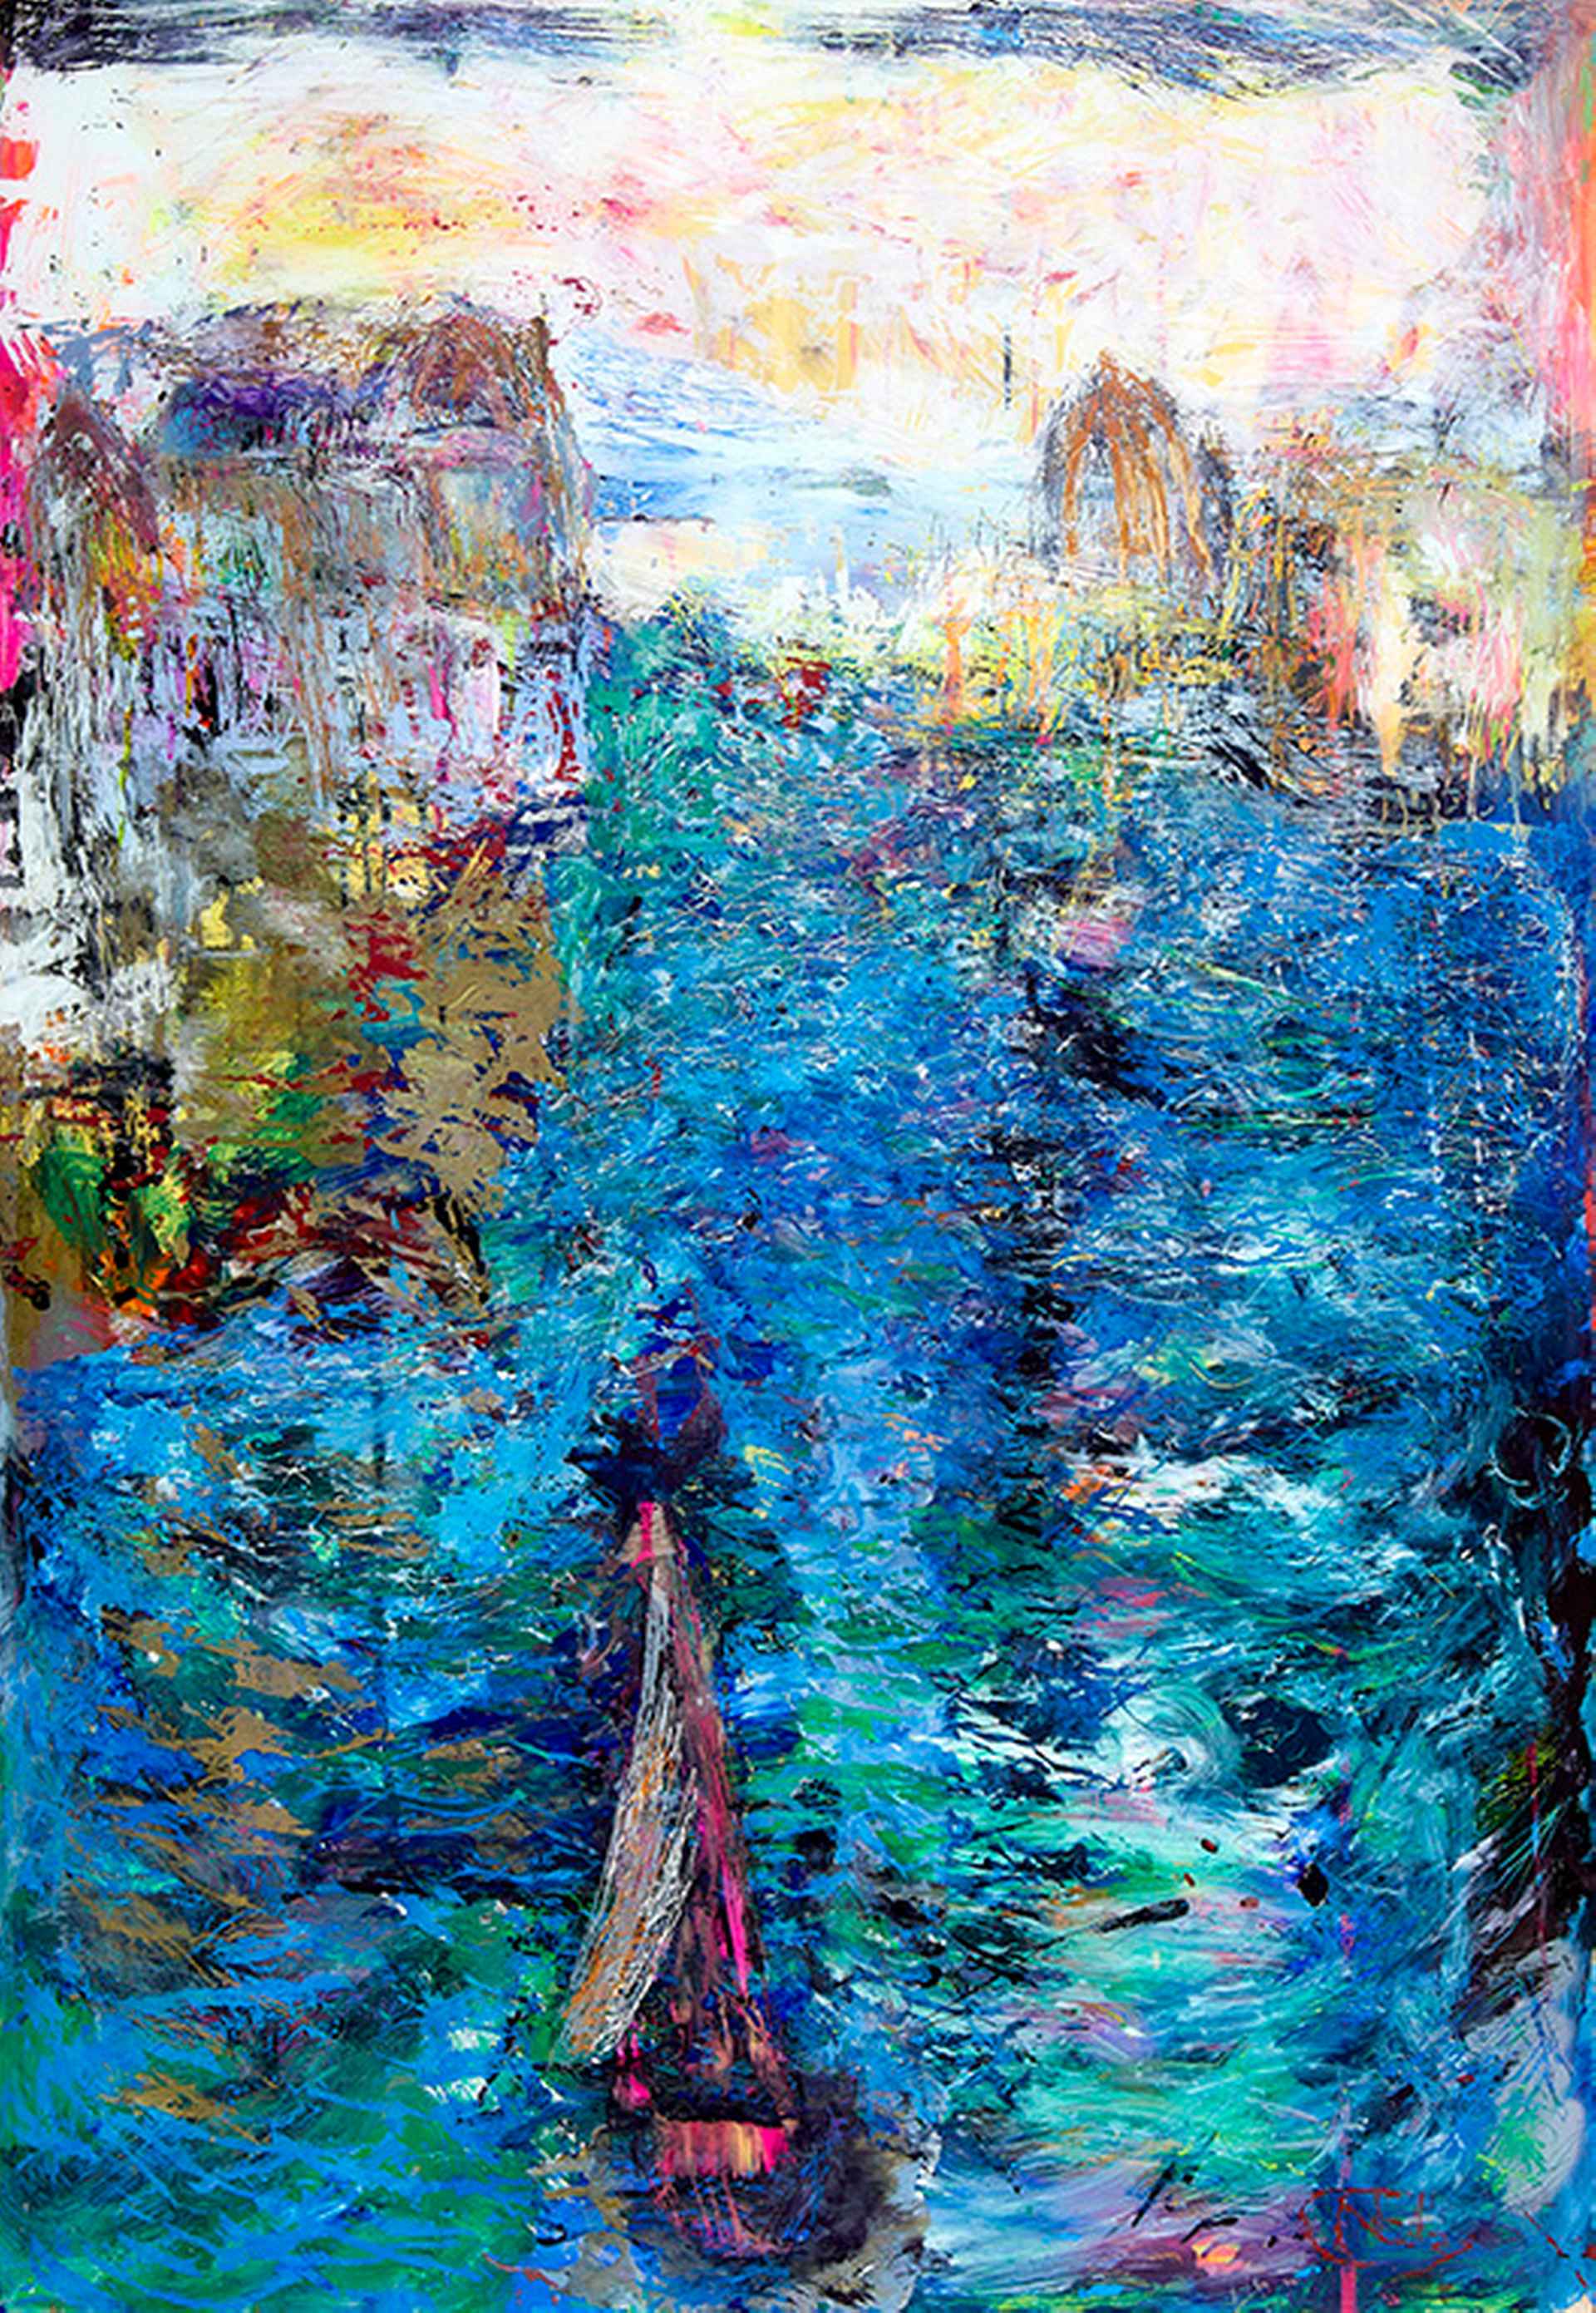 Grand Lagoona (Venice Series) by Nick Coley